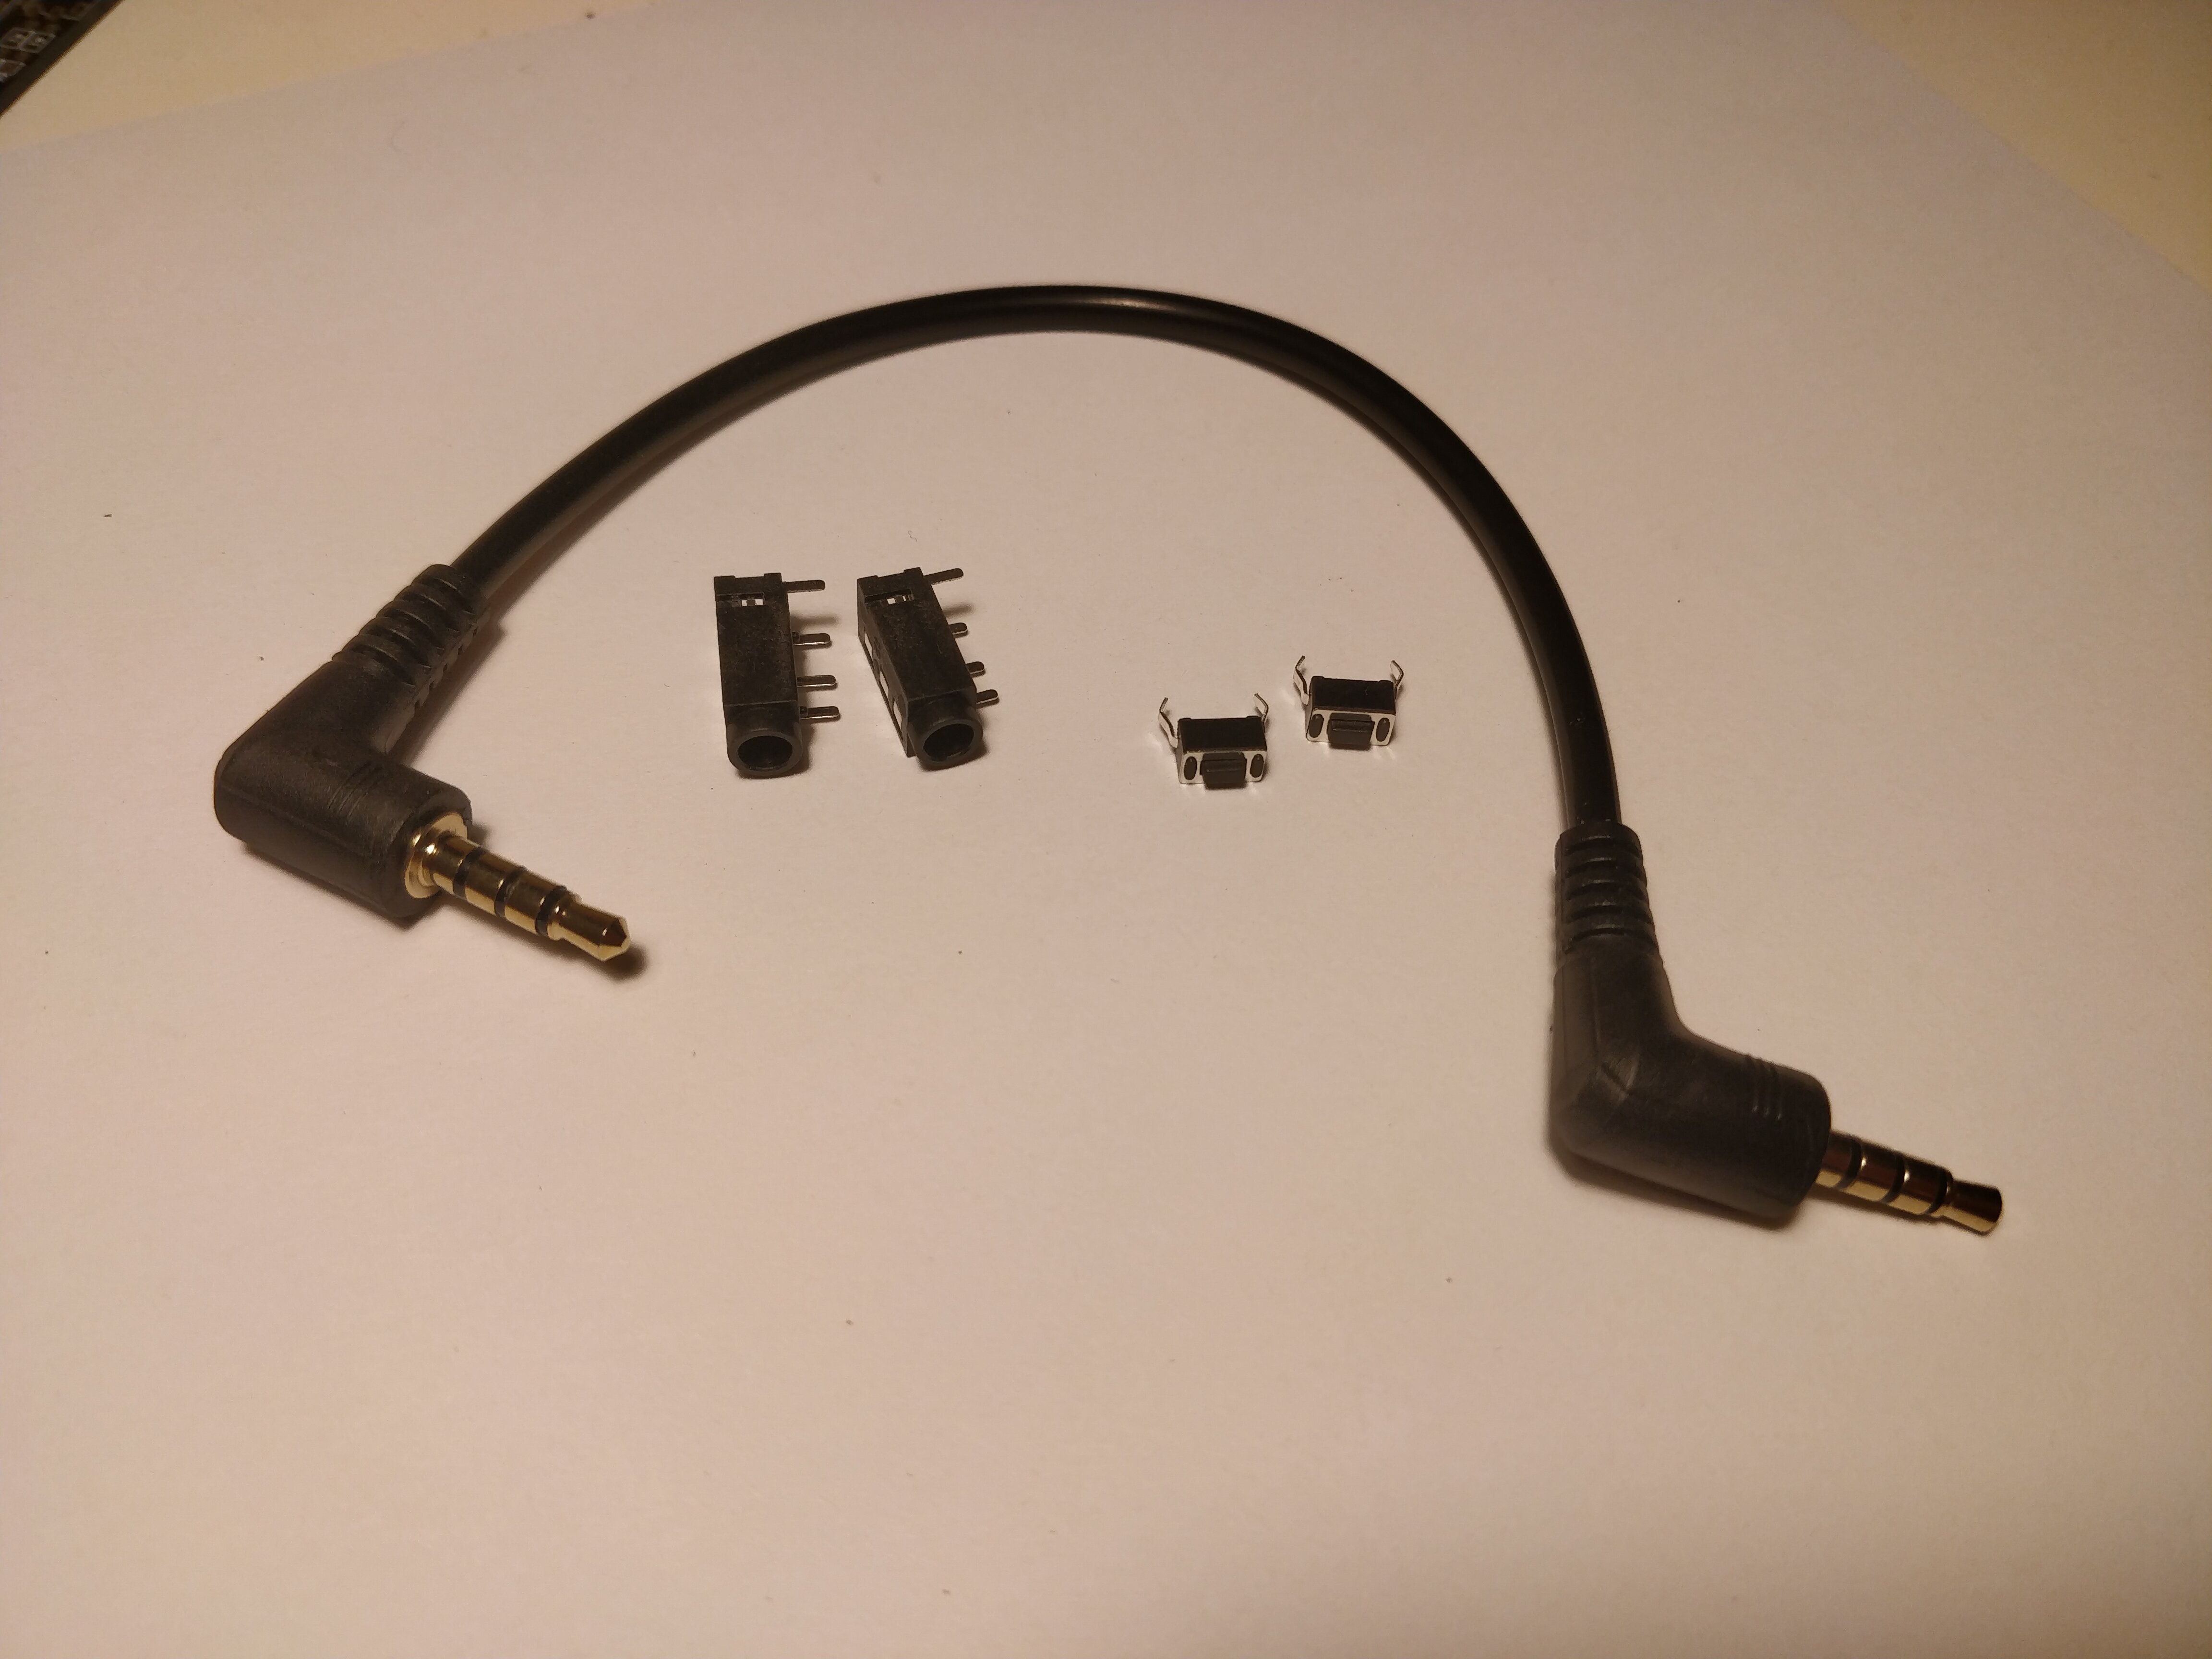 TRSS cable, female connectors and buttons